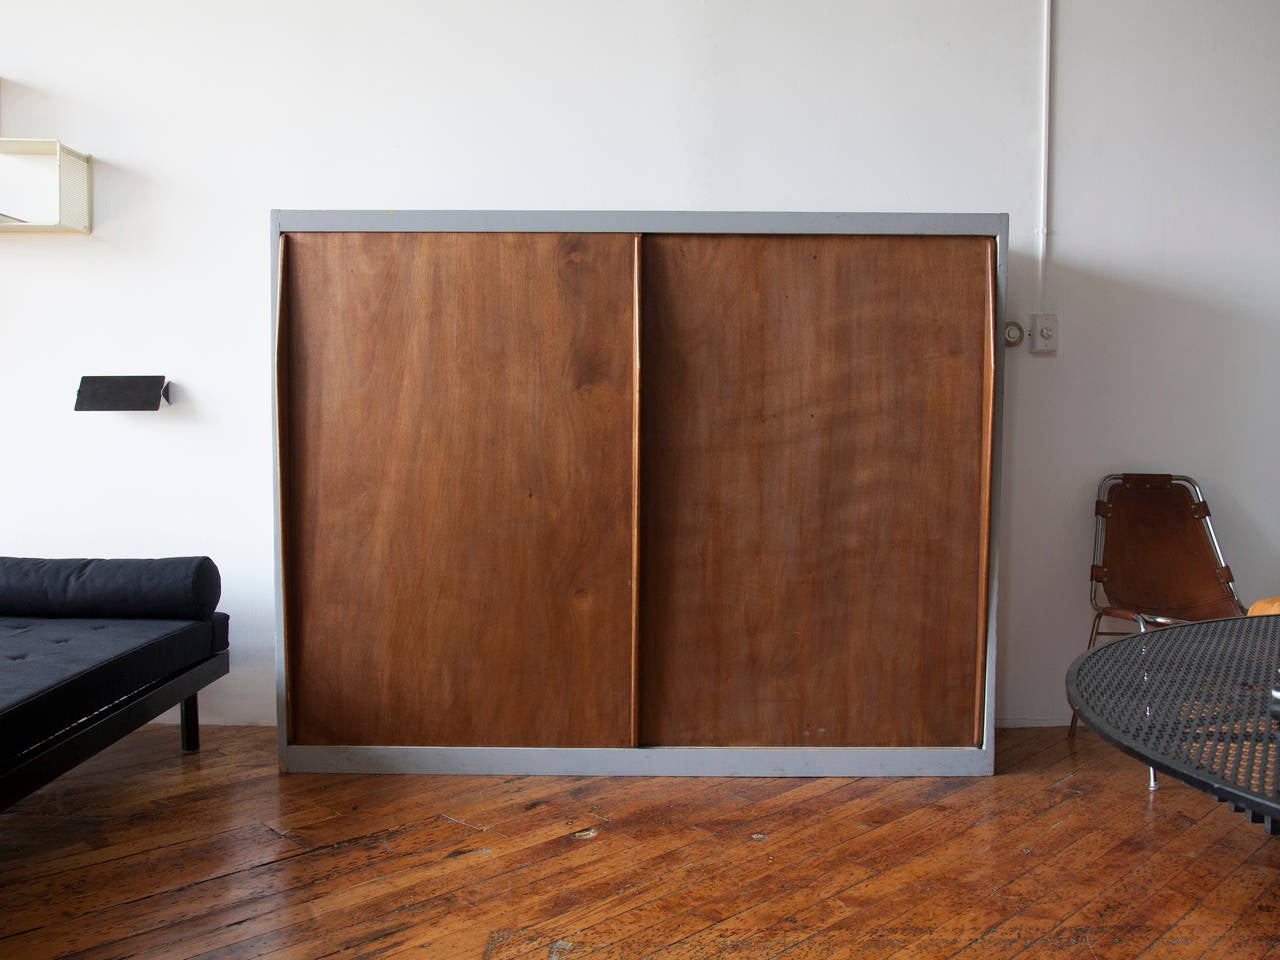 Double-sided room divider with sliding doors and carved handles from the Unité d'habitation, Marseille, by Le Corbusier. Opposite side of divider has small storage compartment for books at bed height.